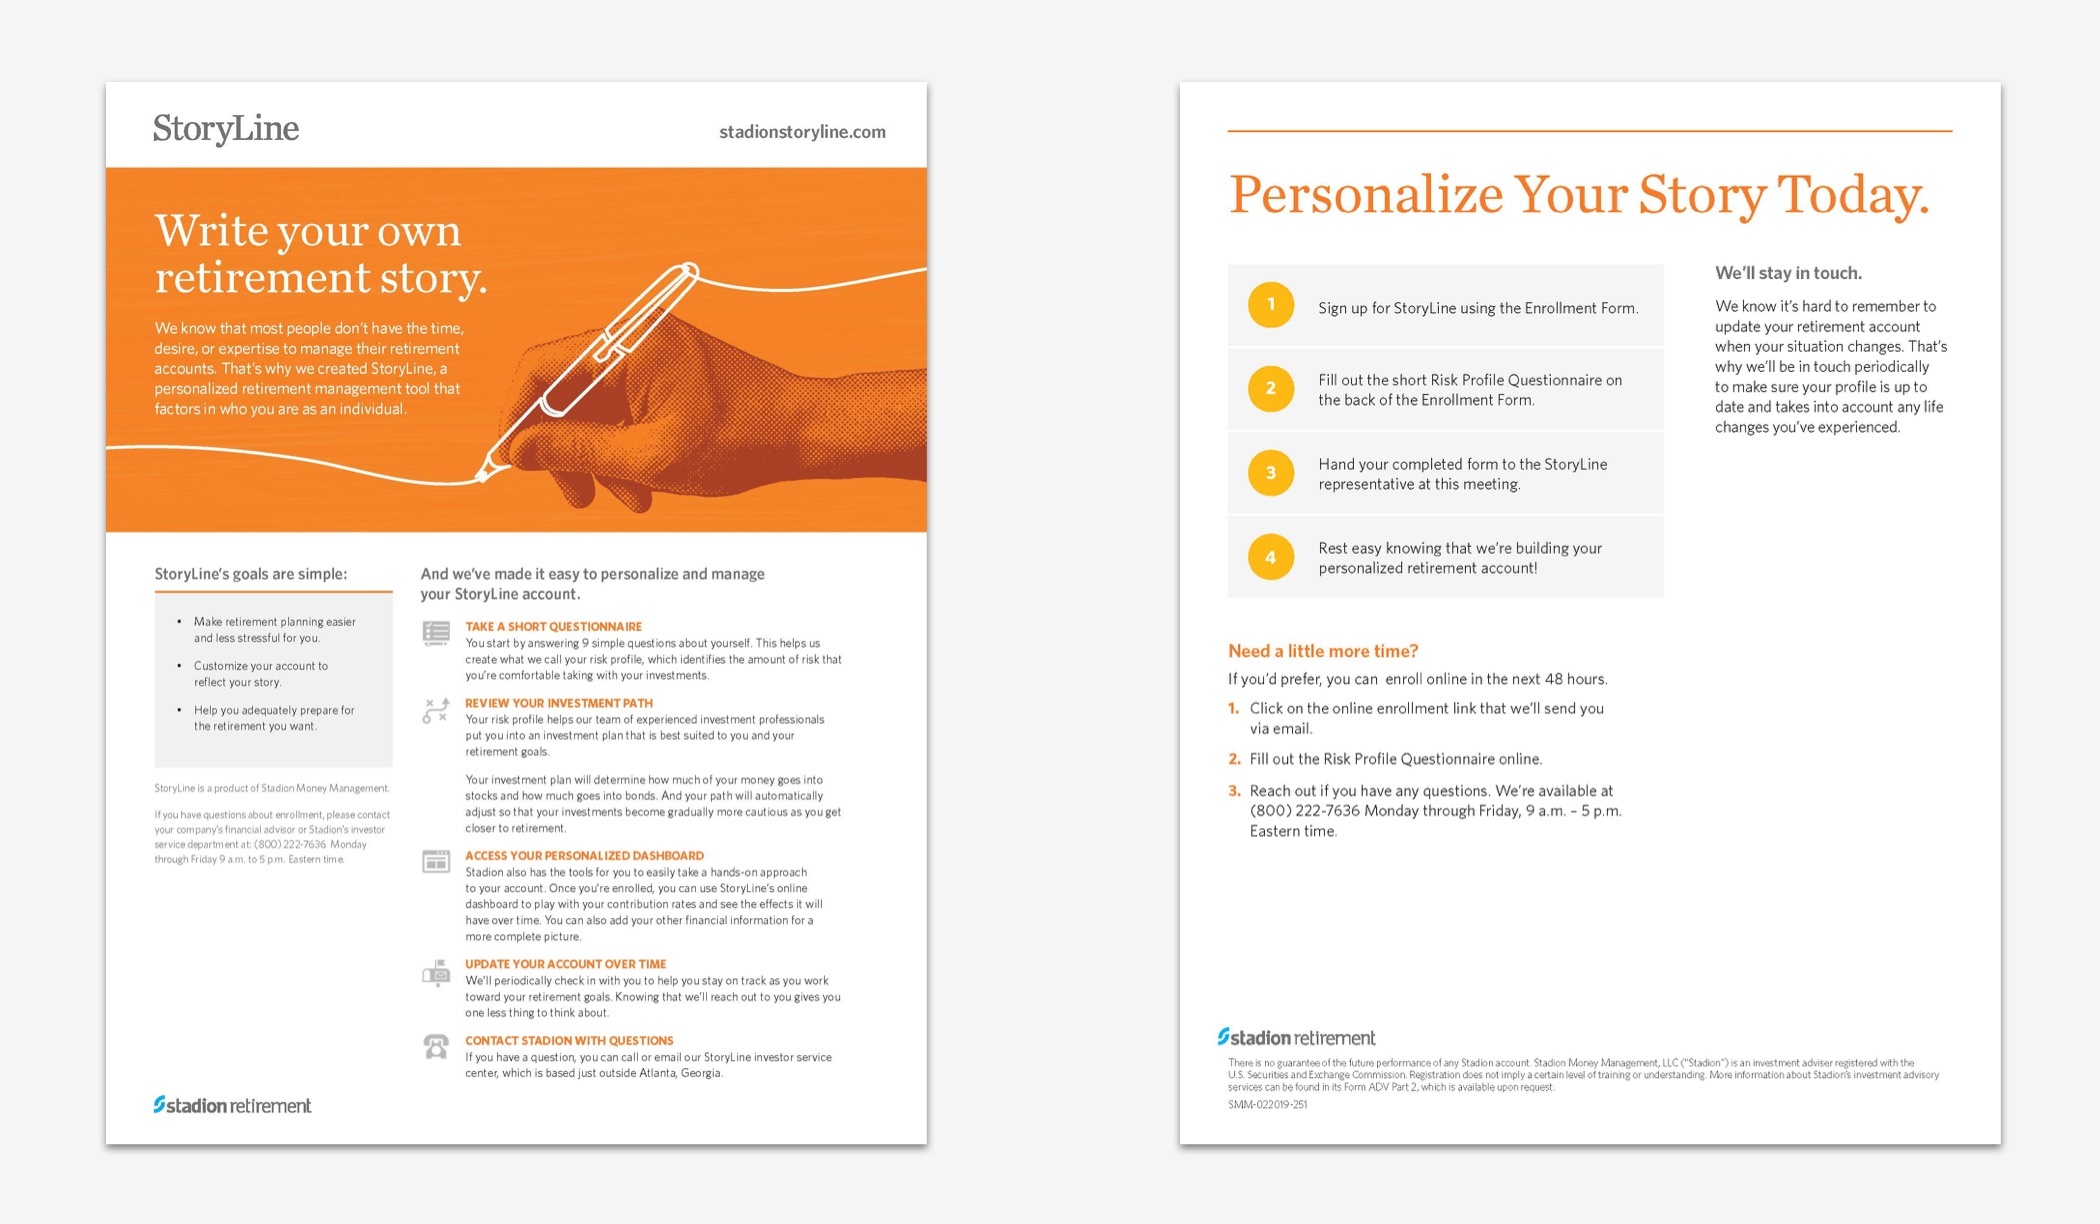 Two sales sheets with headlines “Write your own retirement story” and “Personalize Your Story Today.”